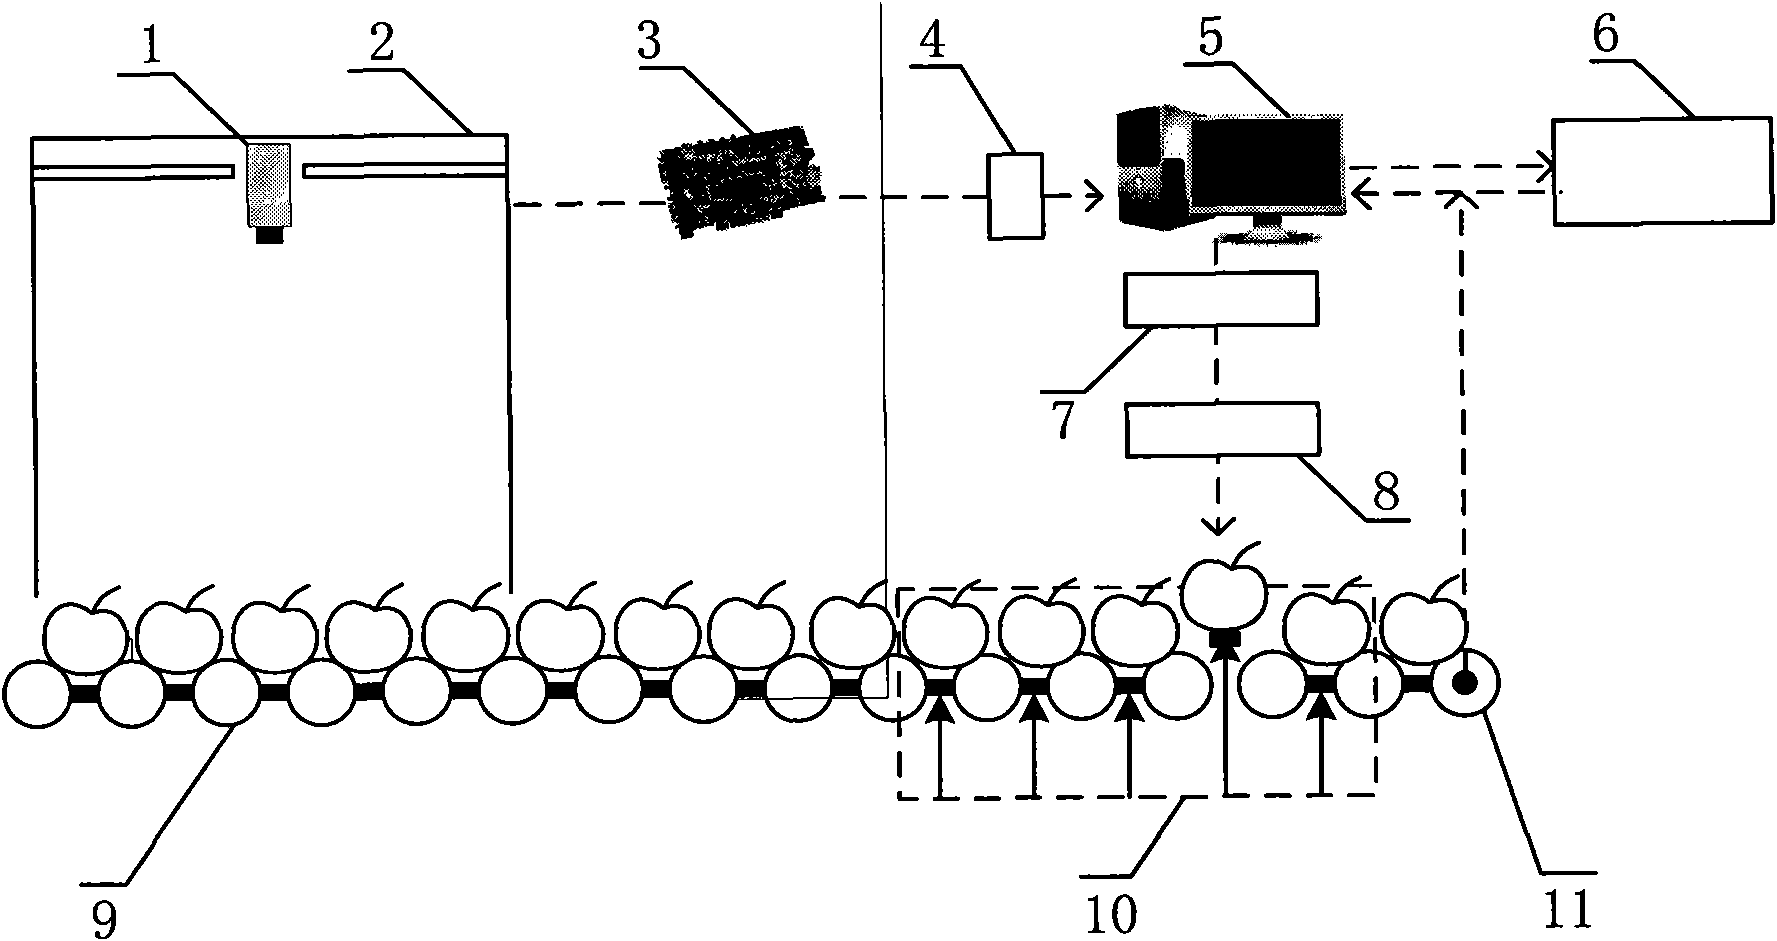 Fruit grading system and method based on DSP machine vision